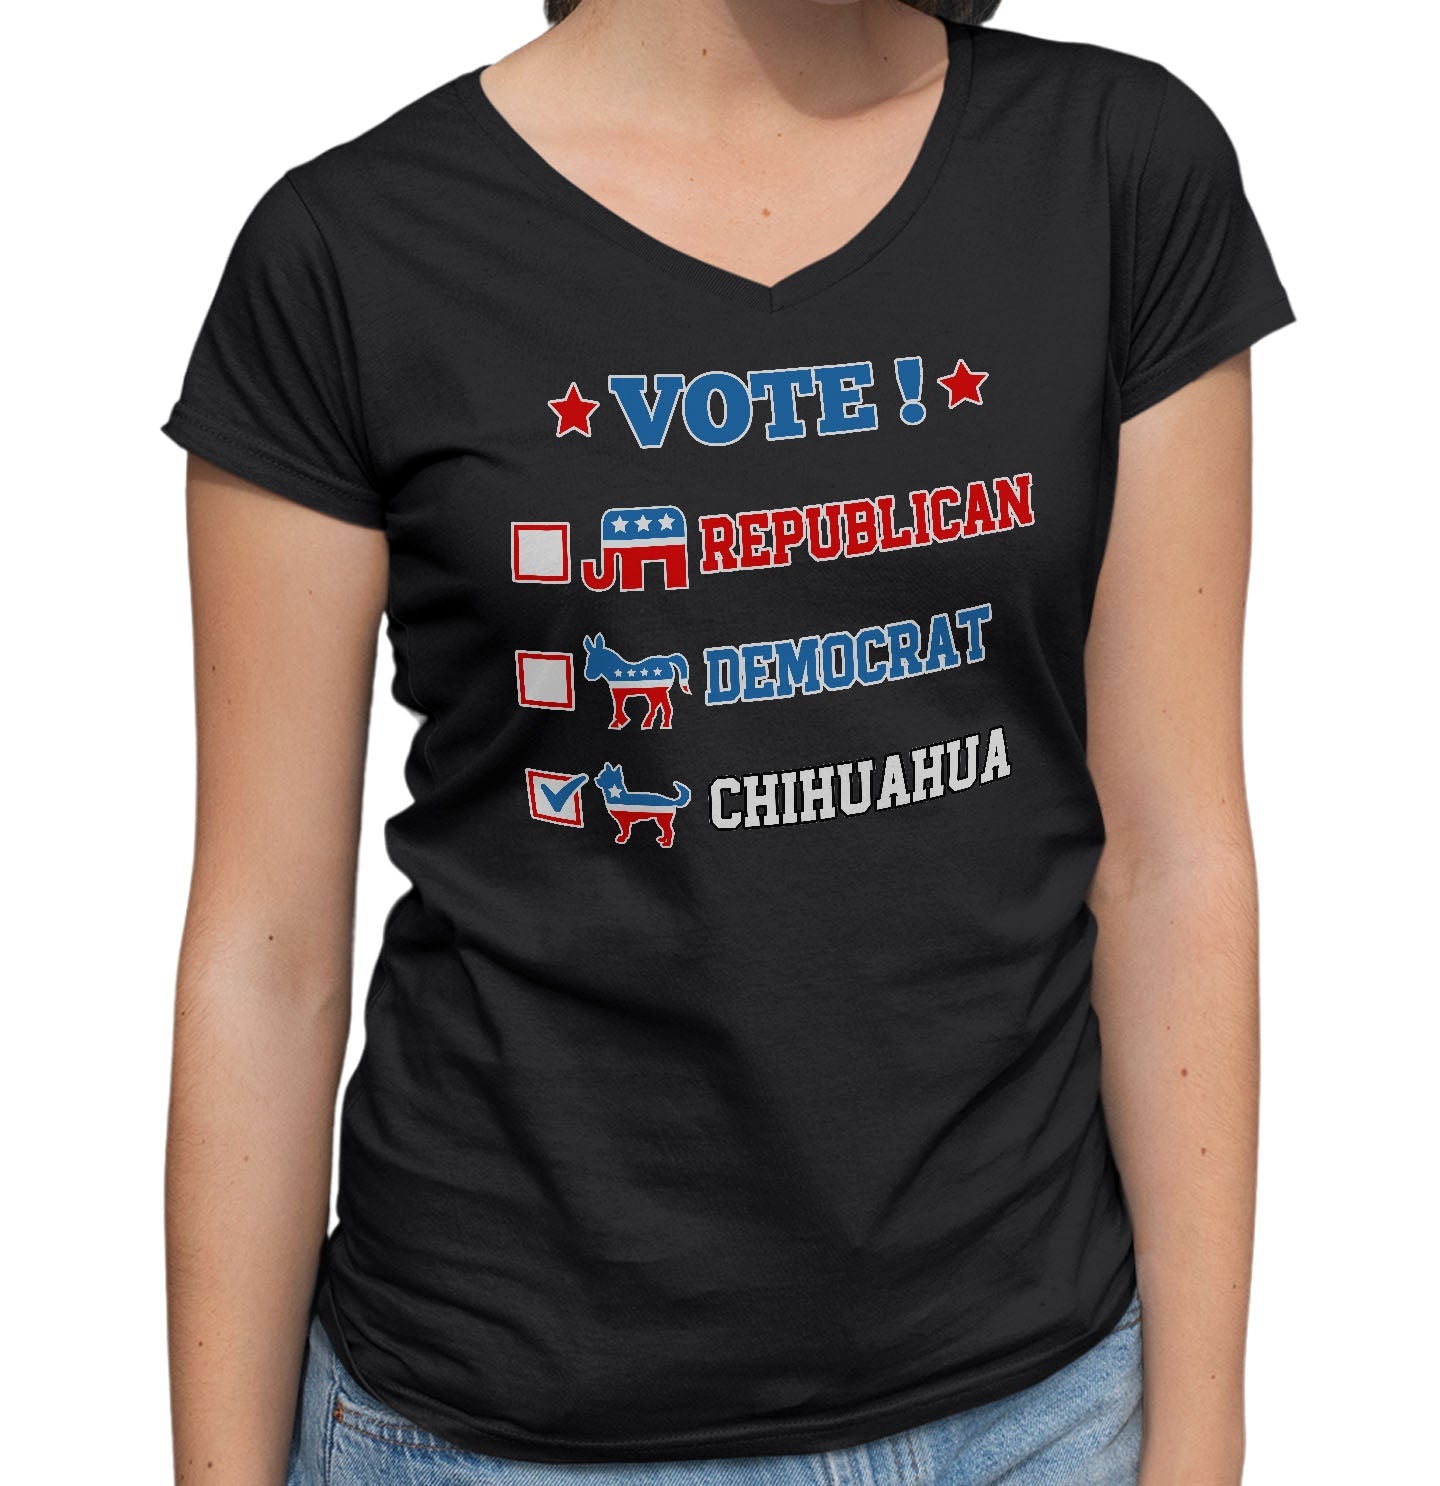 Vote for the Chihuahua (Short-Haired) - Women's V-Neck T-Shirt